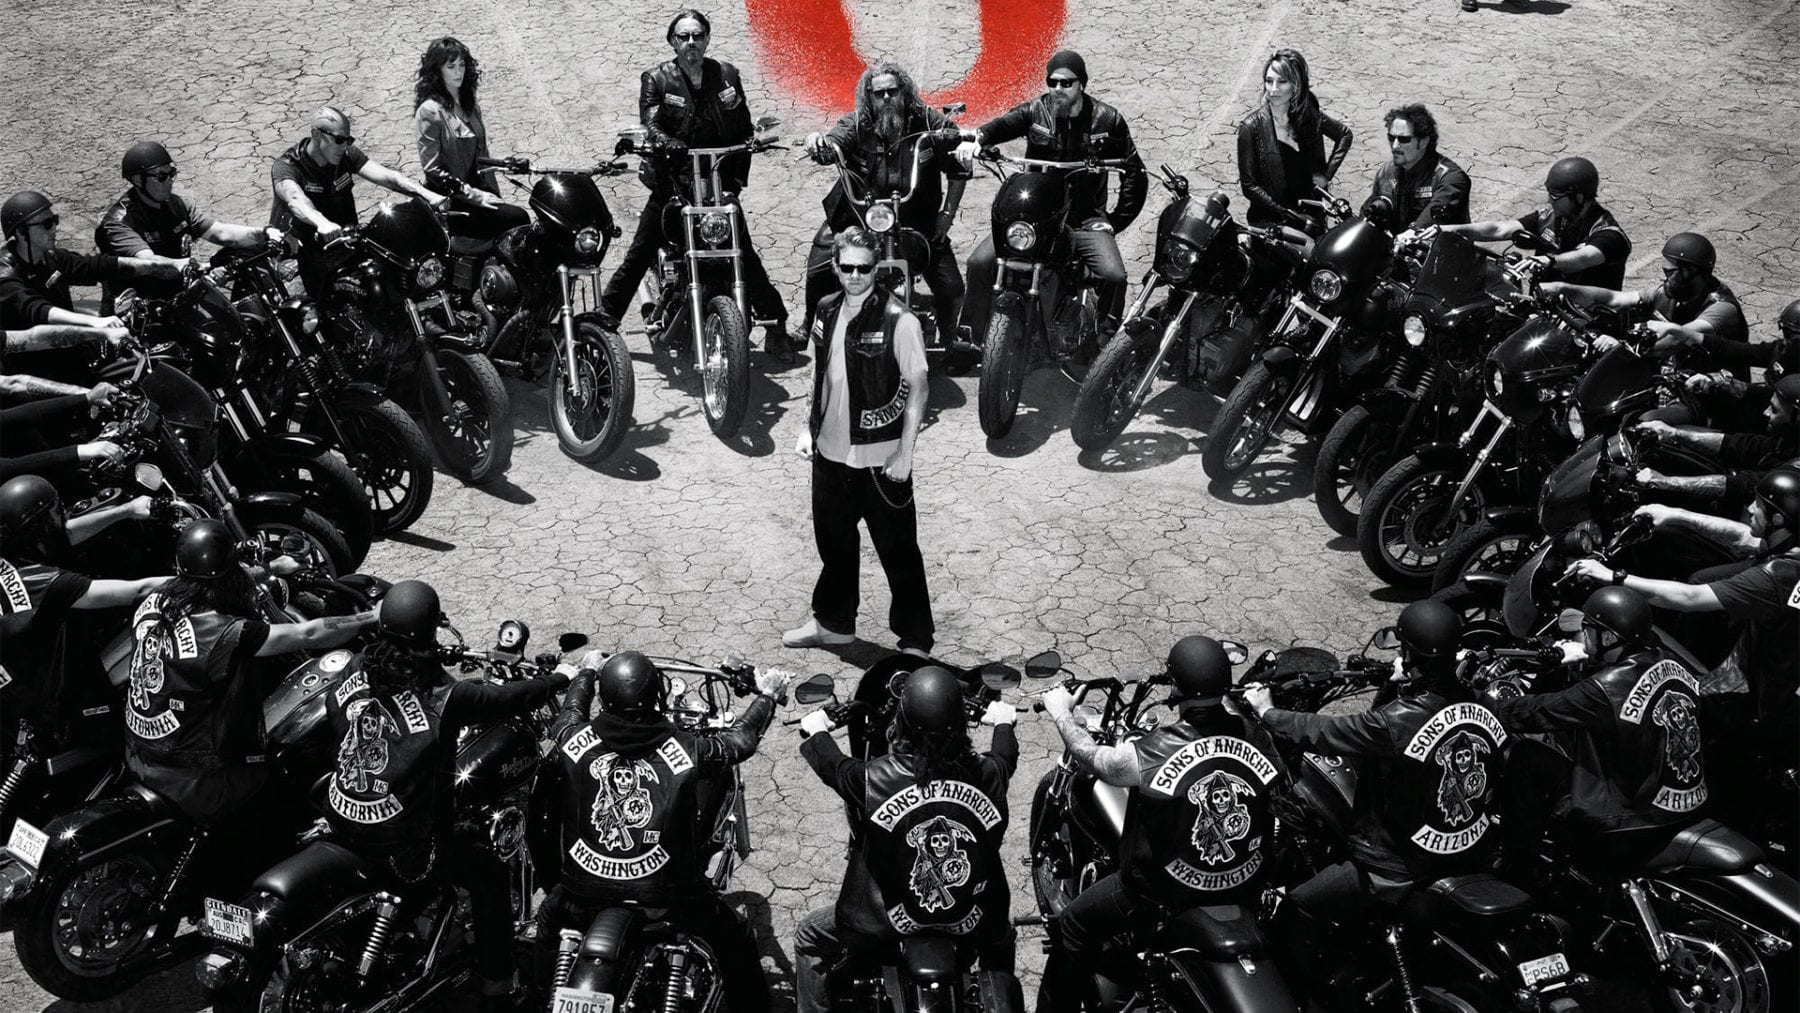 kurt sutter explains why sons of anarchy has been pulled from netflix